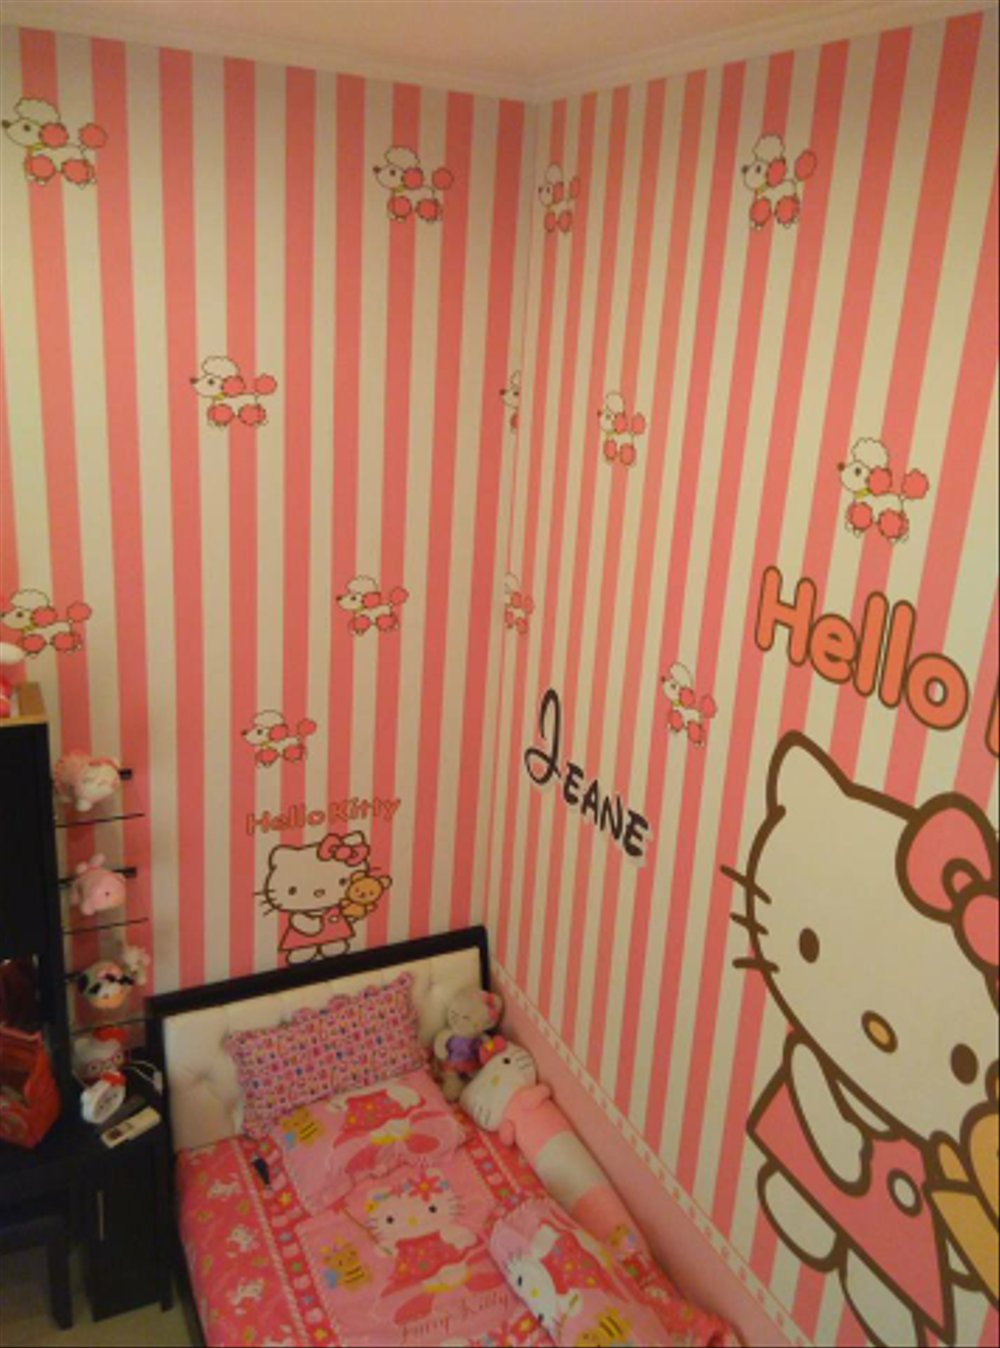 Wallpaper Dinding Hello Kitty 3d Image Num 19